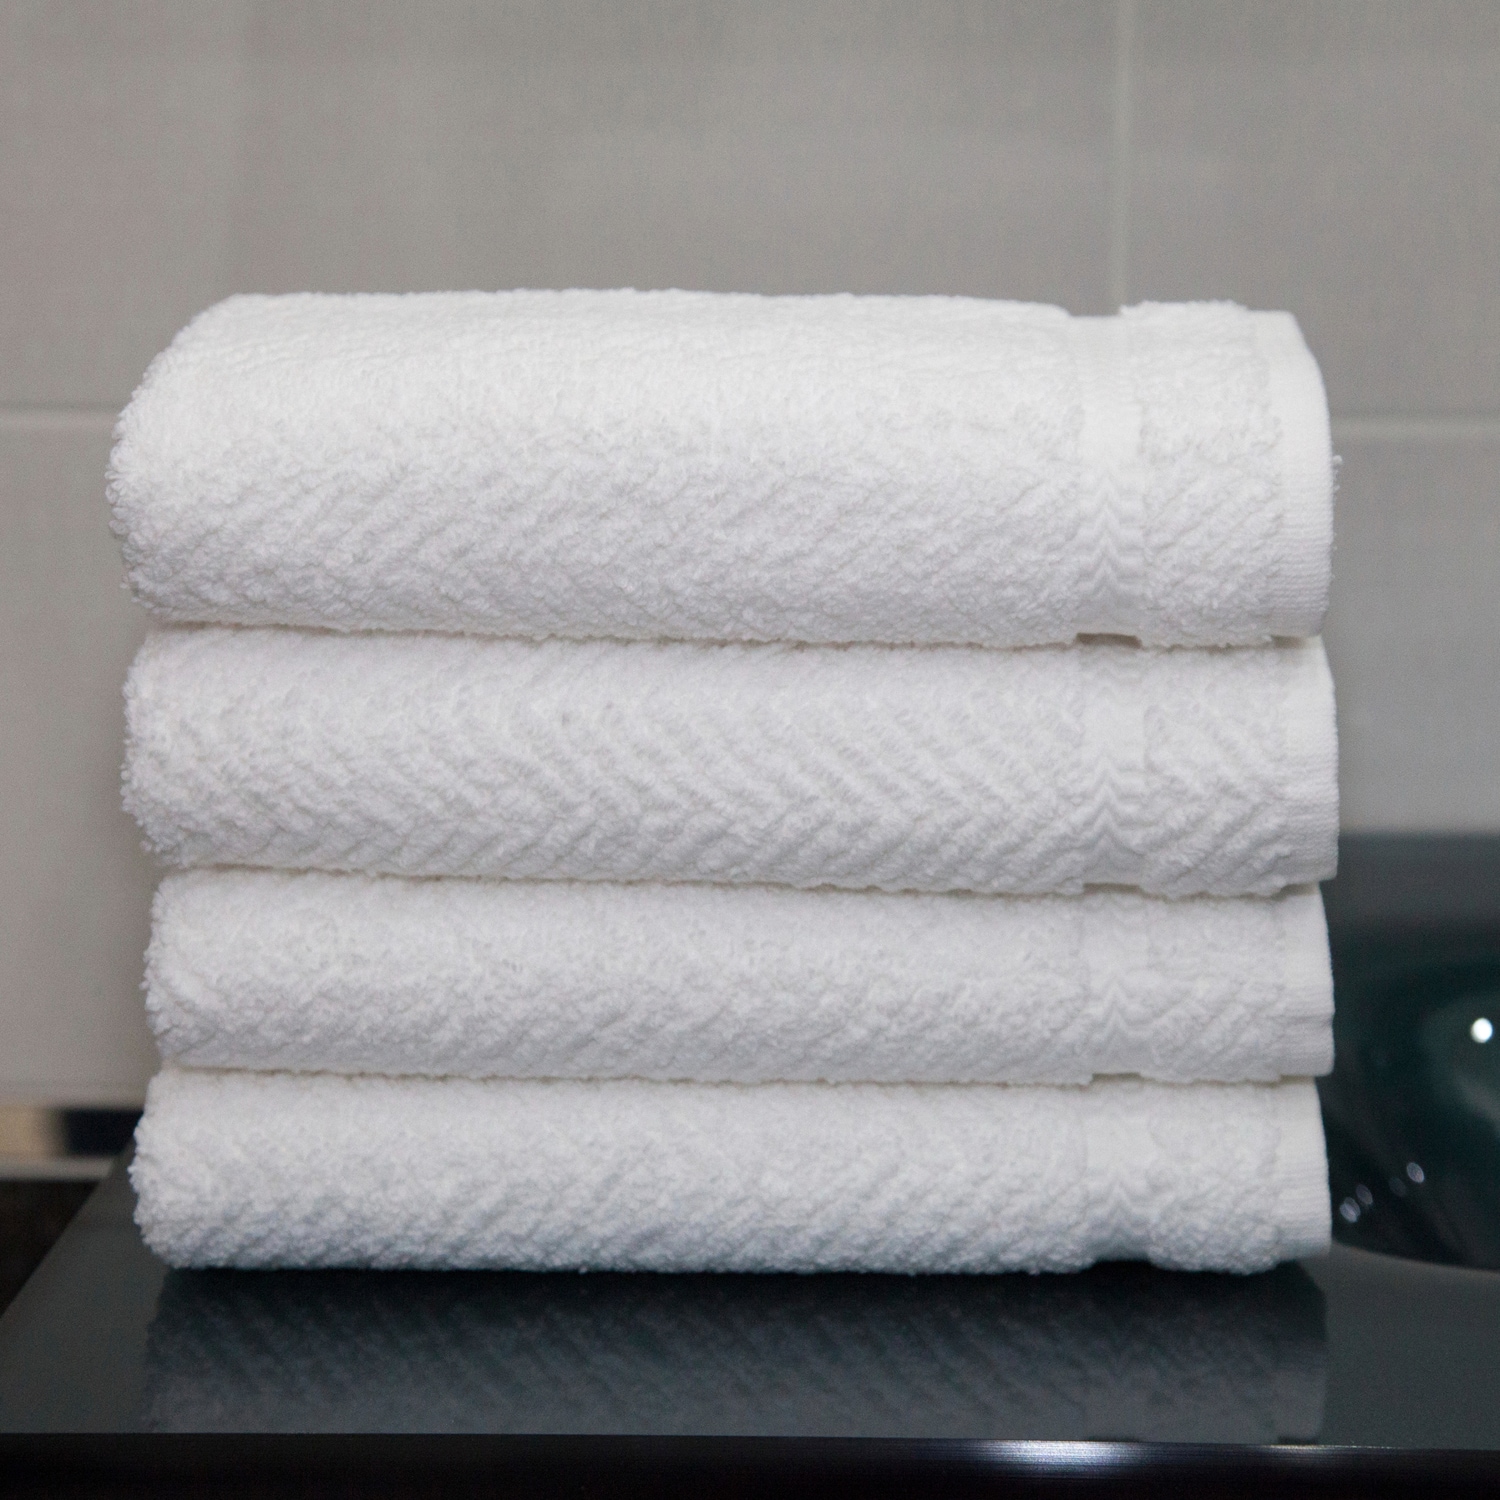 4 MONOGRAMMED  WHITE HAND TOWELS/GRANDEUR HOSPITALITY/COTTON SALE *** NEW 